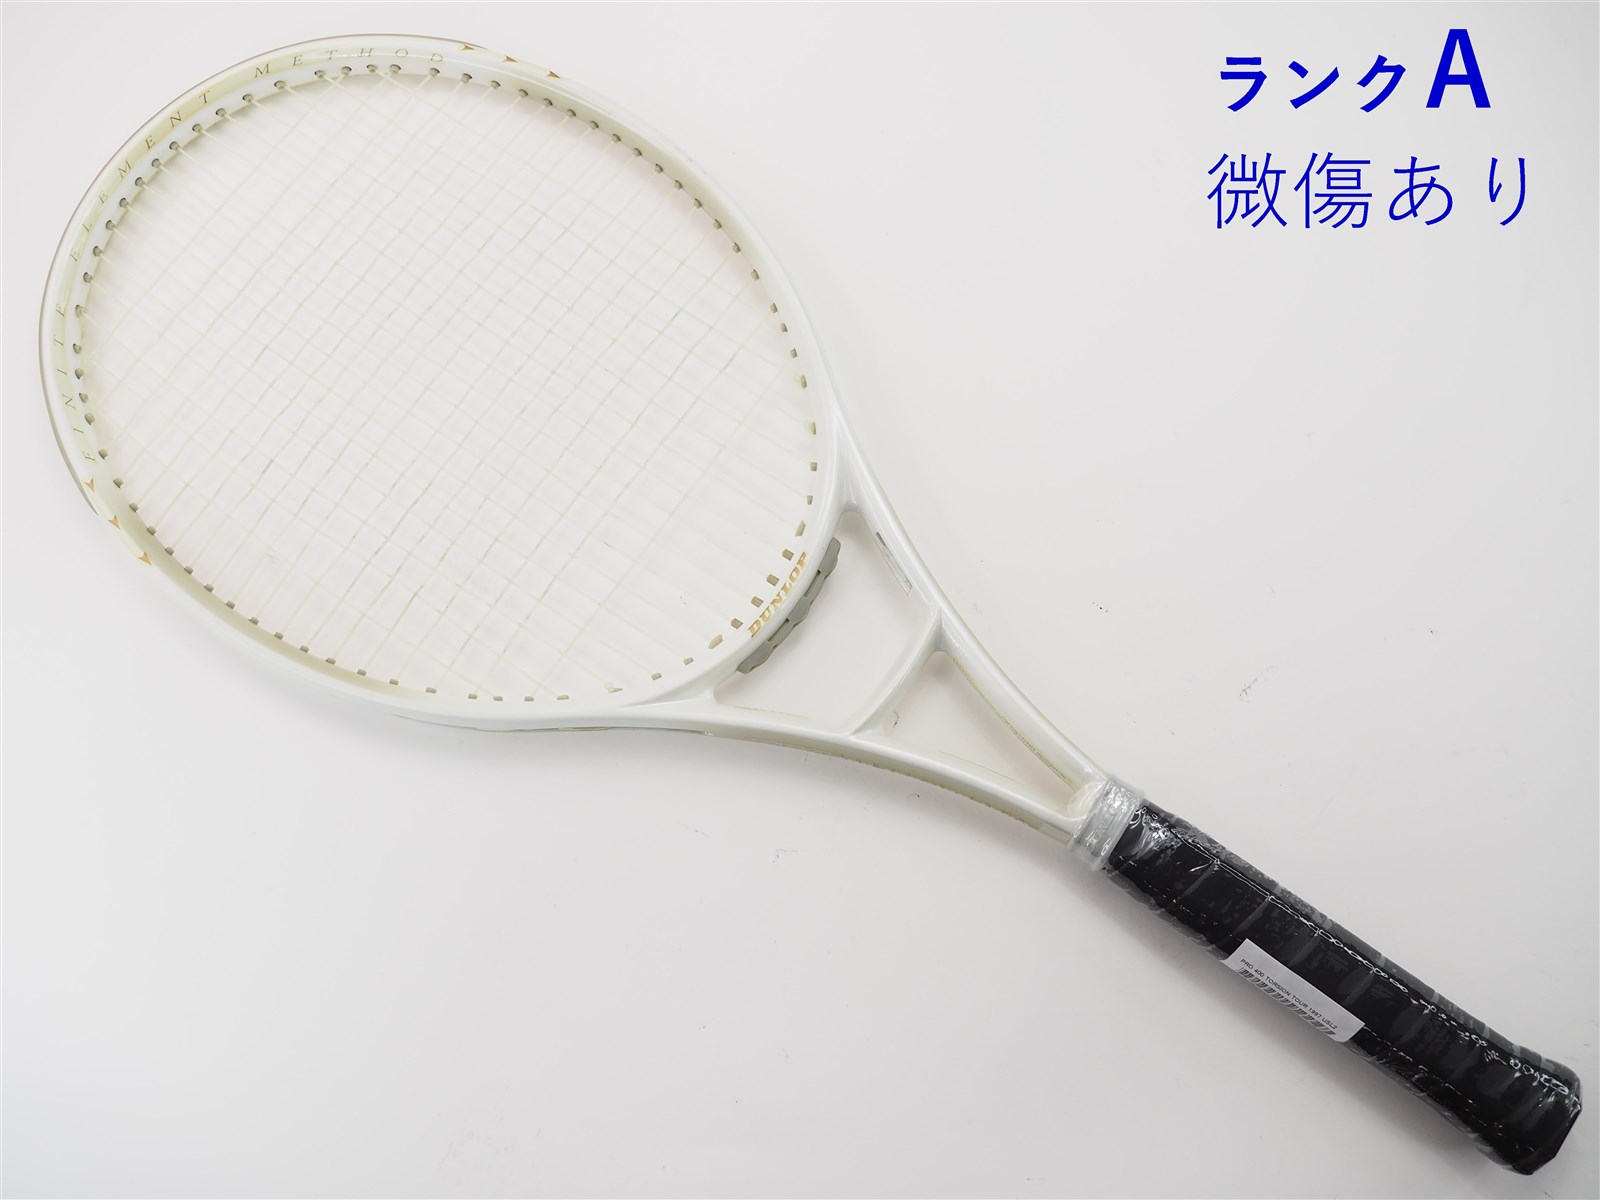 238] DUNLOP DiaCluster 400 テニスラケット - ラケット(軟式用)